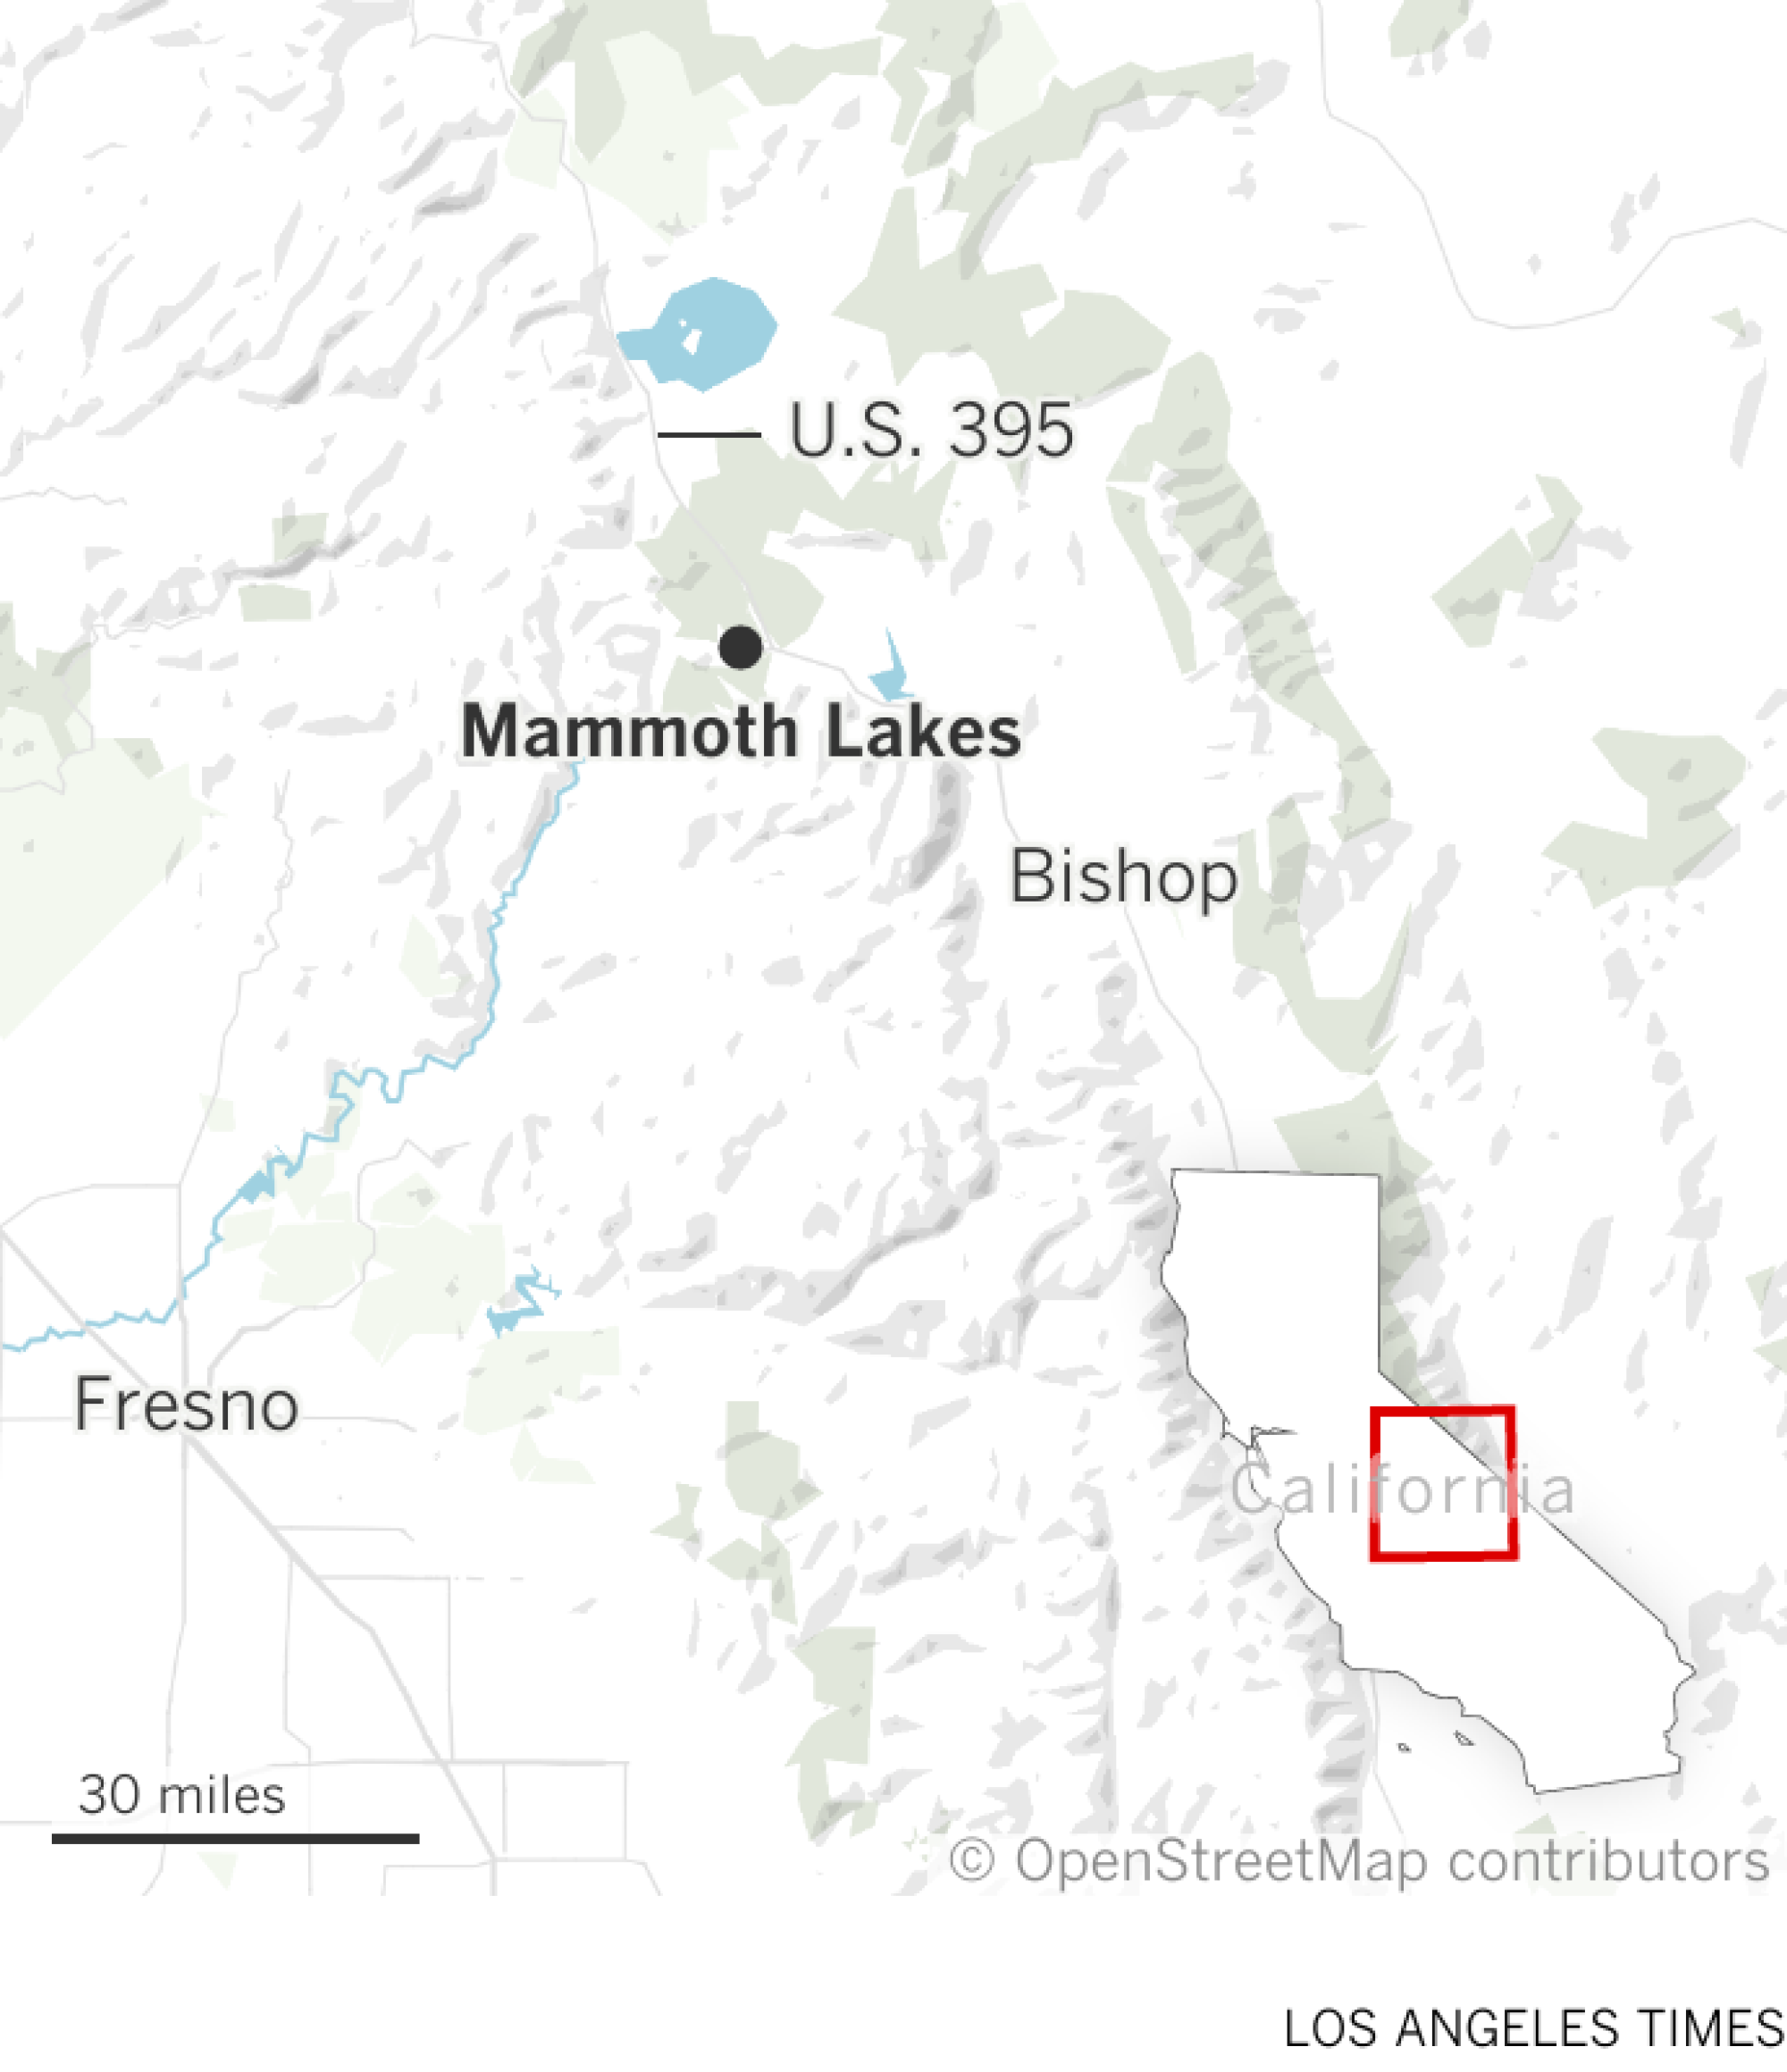 Map shows location of Mammoth Lakes, which is off the U.S. 395 highway, and northwest of Bishop, in Mono County.